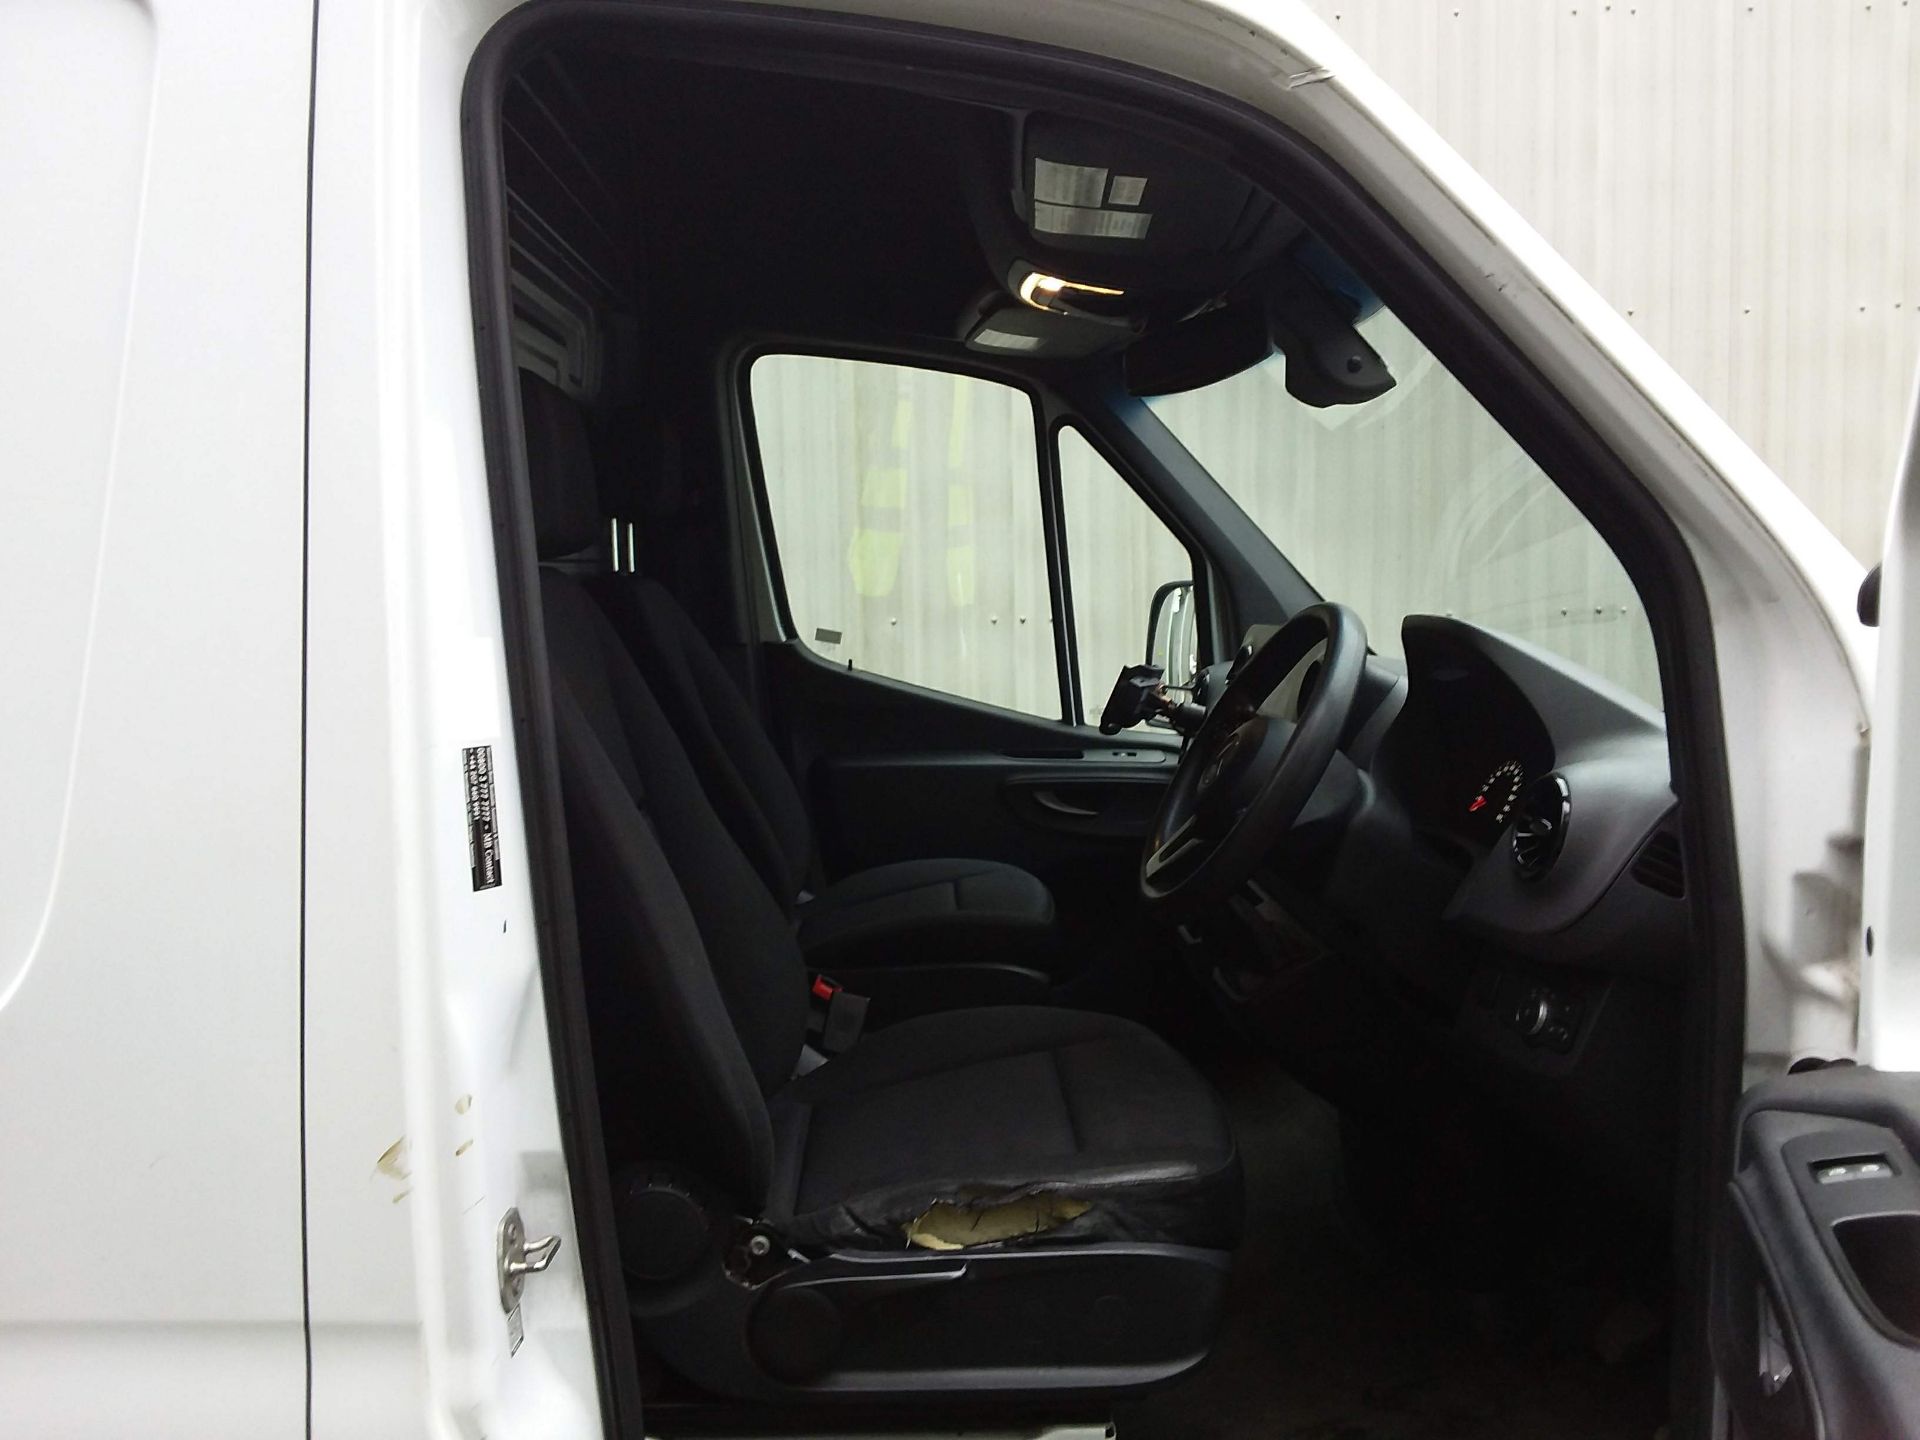 MERCEDES SPRINTER CDI "LWB HIGH ROOF" 2019 MODEL - ONLY 50K MILES!! CRUISE CONTROL (NEW SHAPE) - Image 11 of 12